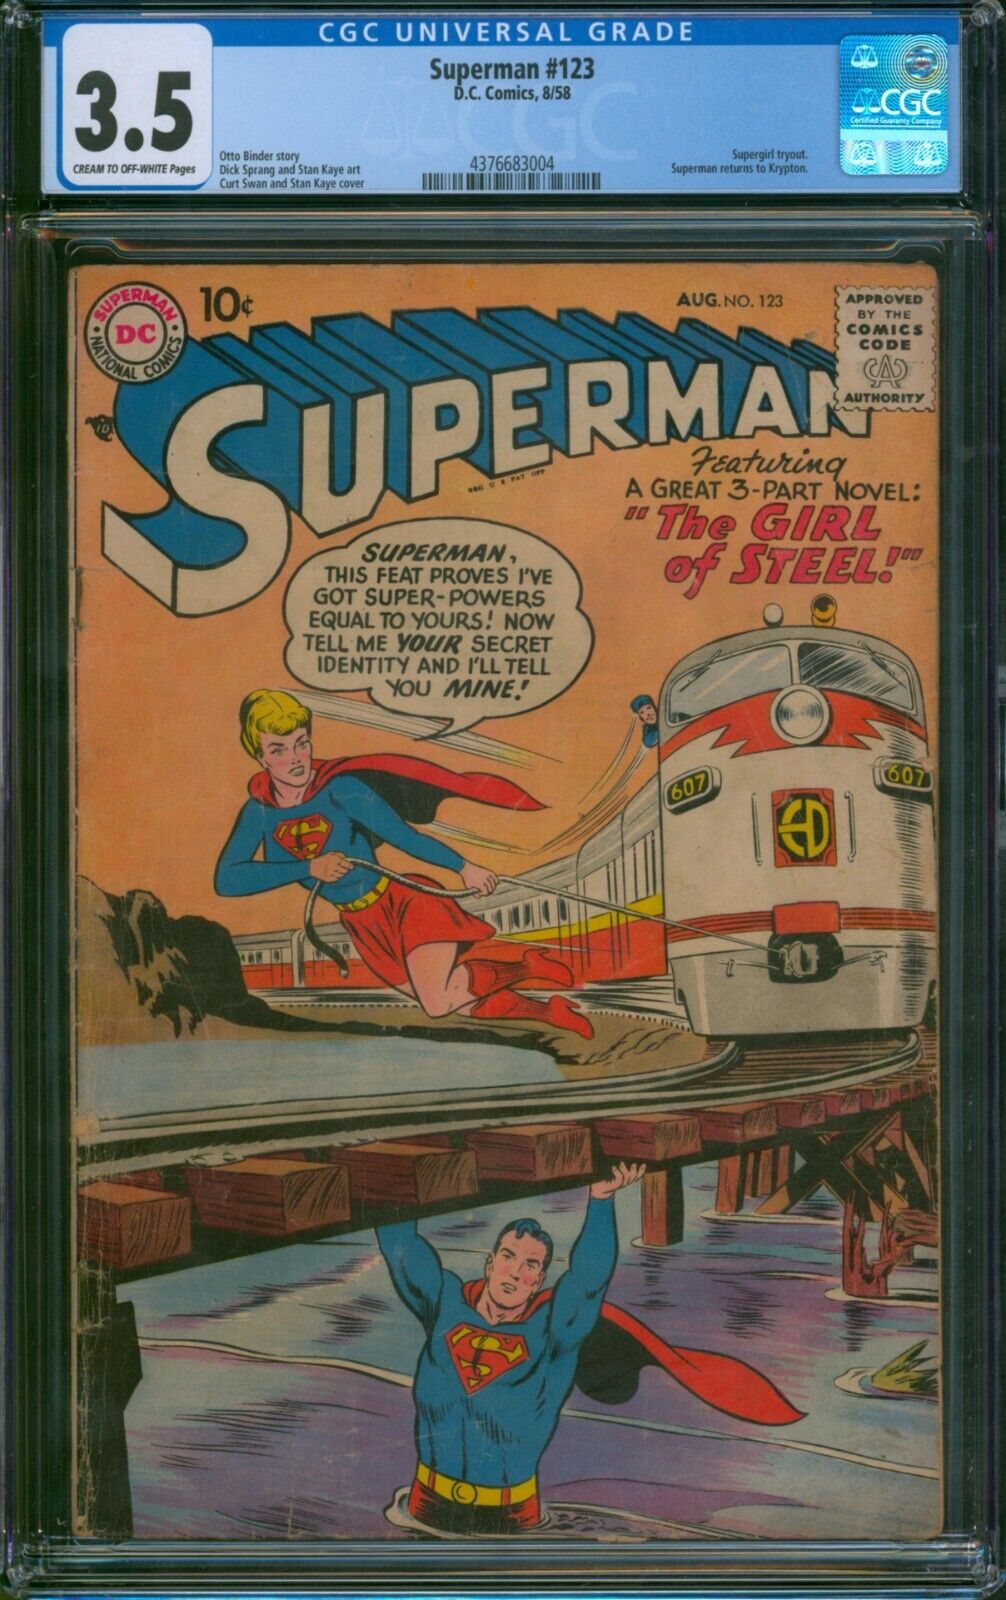 Superman #123 (1958) ⭐ CGC 3.5 ⭐ Supergirl Tryout Silver Age DC Comic